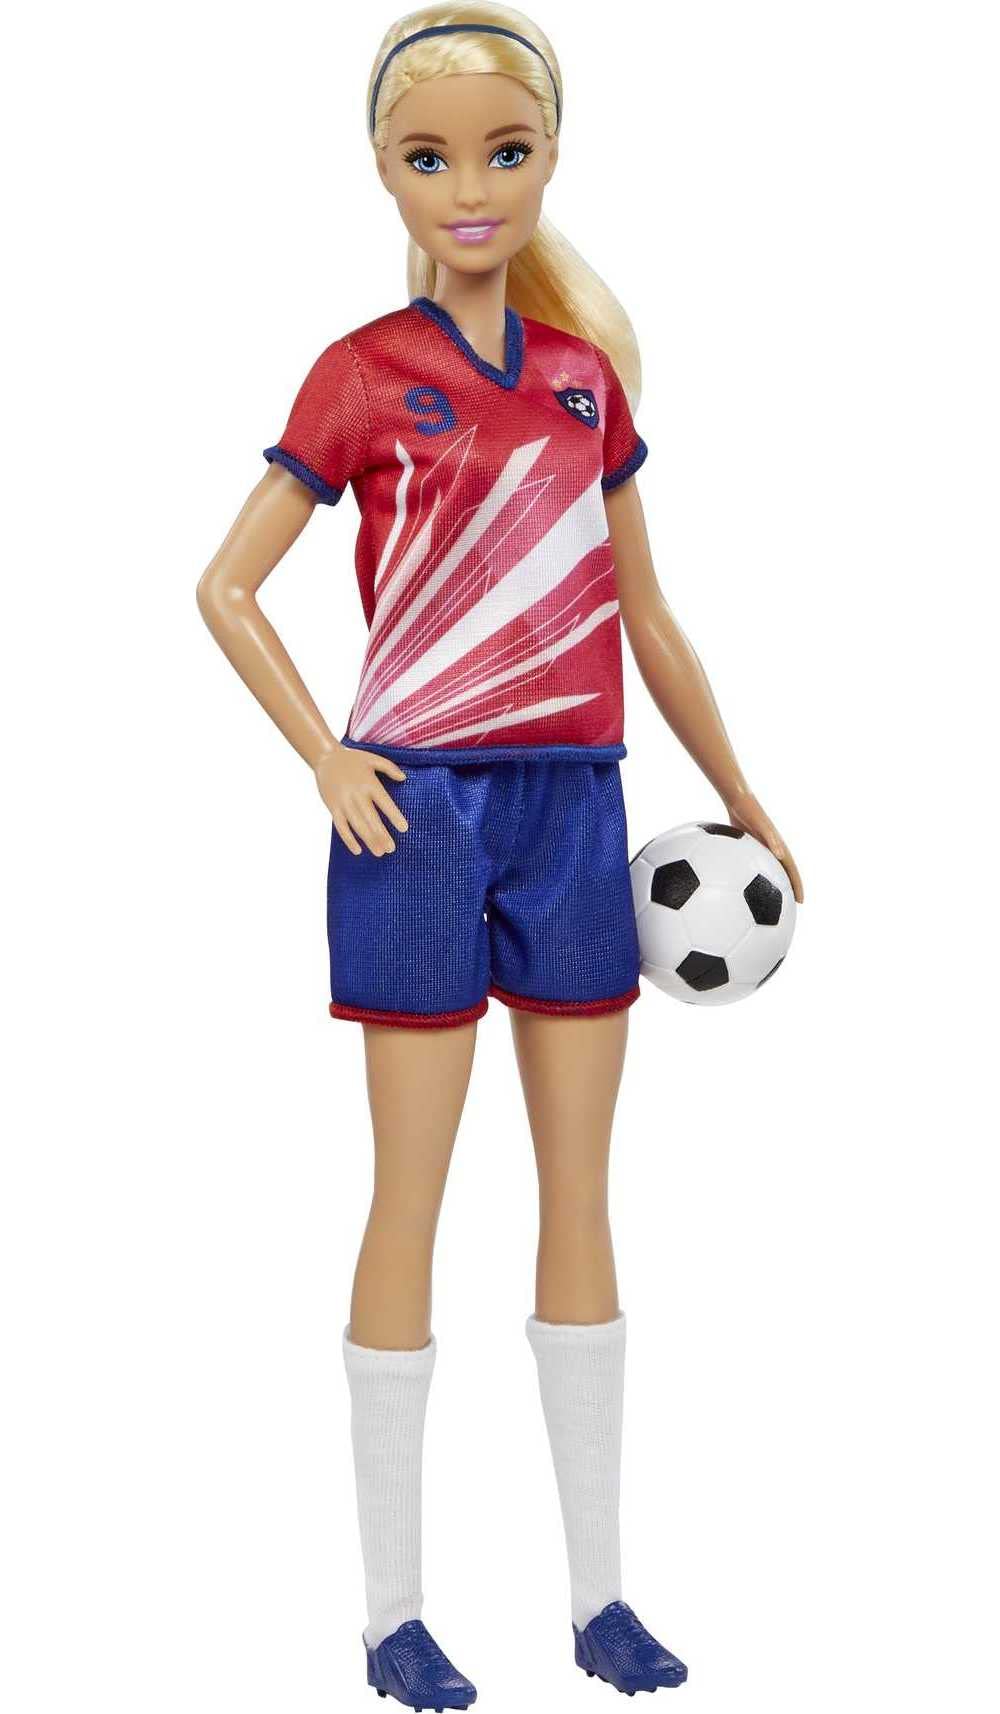 Barbie Soccer Fashion Doll with Blonde Ponytail, Colorful #9 Uniform, Cleats & Tall Socks, Soccer Ball 11.5 inches